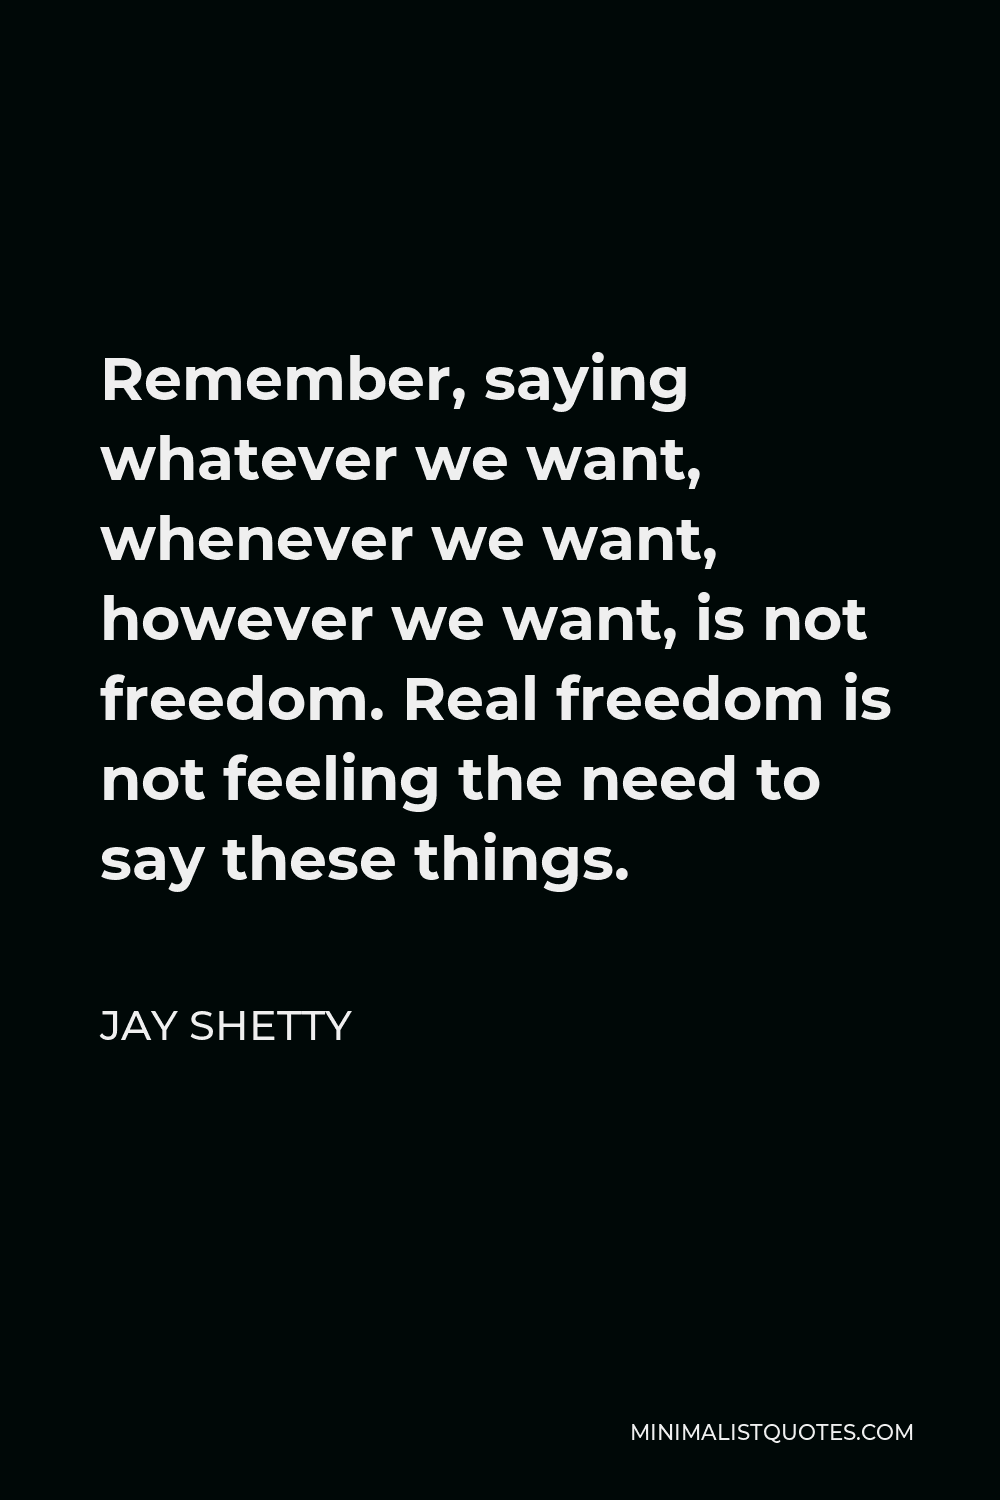 Jay Shetty Quote - Remember, saying whatever we want, whenever we want, however we want, is not freedom. Real freedom is not feeling the need to say these things.